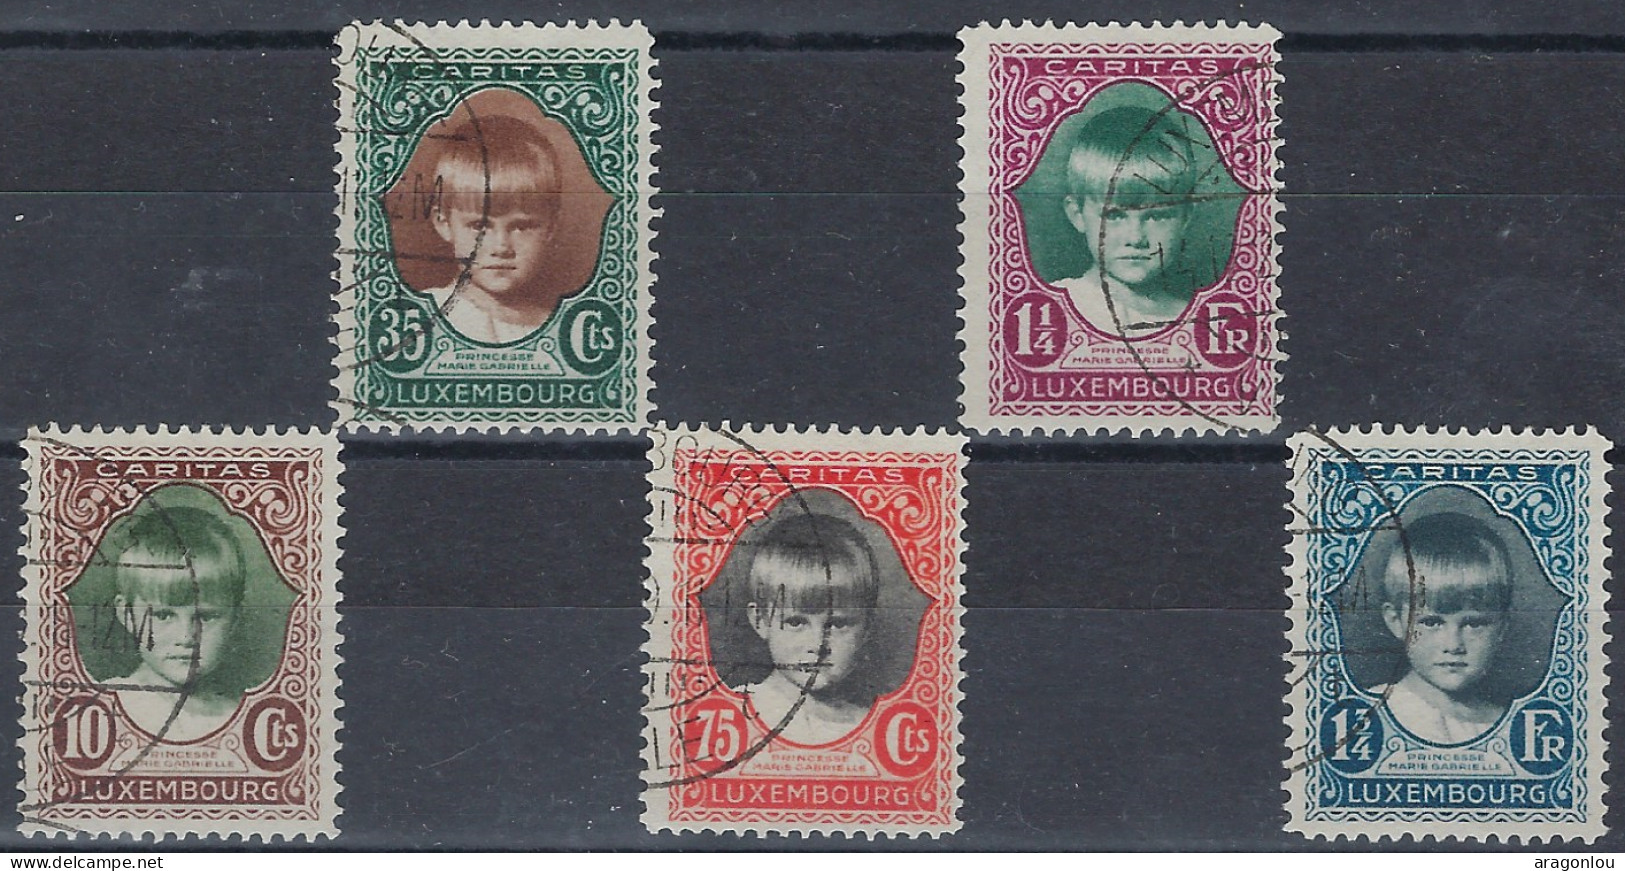 Luxembourg - Luxemburg - Timbre Série 1929   Princesse Marie-Gabrielle   ° - Used Stamps